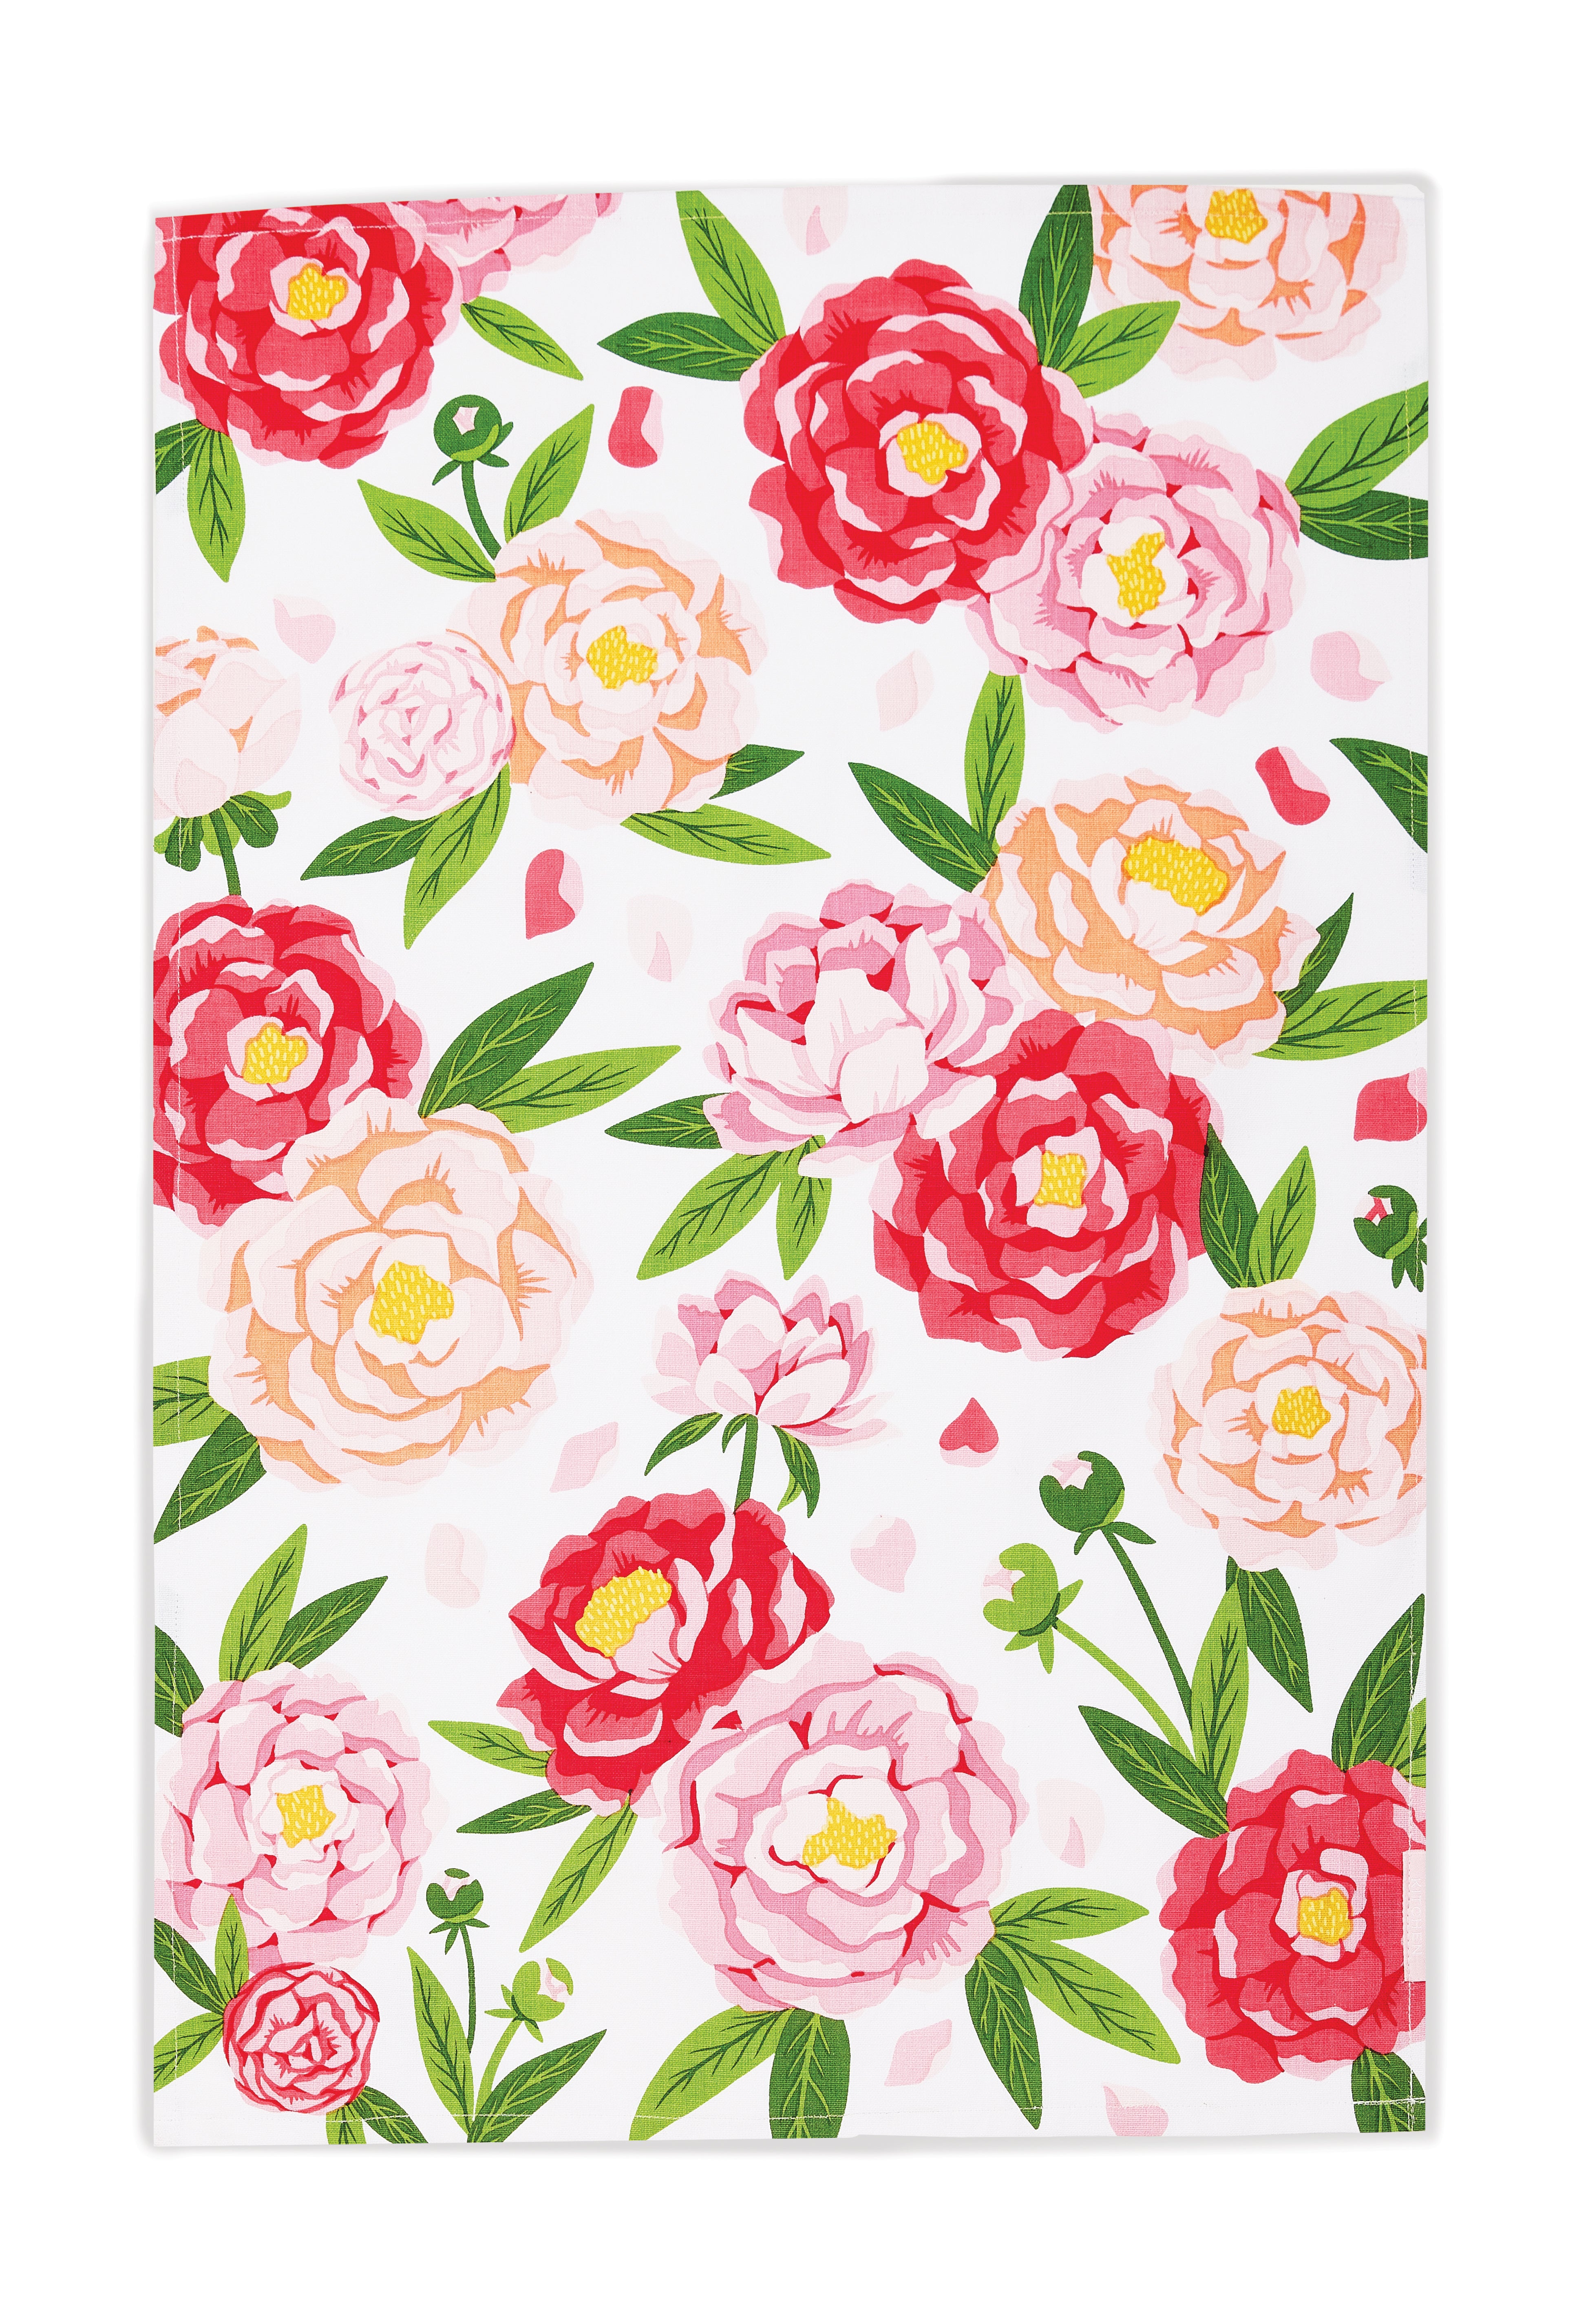 Stonewall Kitchen Peonies Tea Towel  at Olive Oil Etcetera in Bucks County 